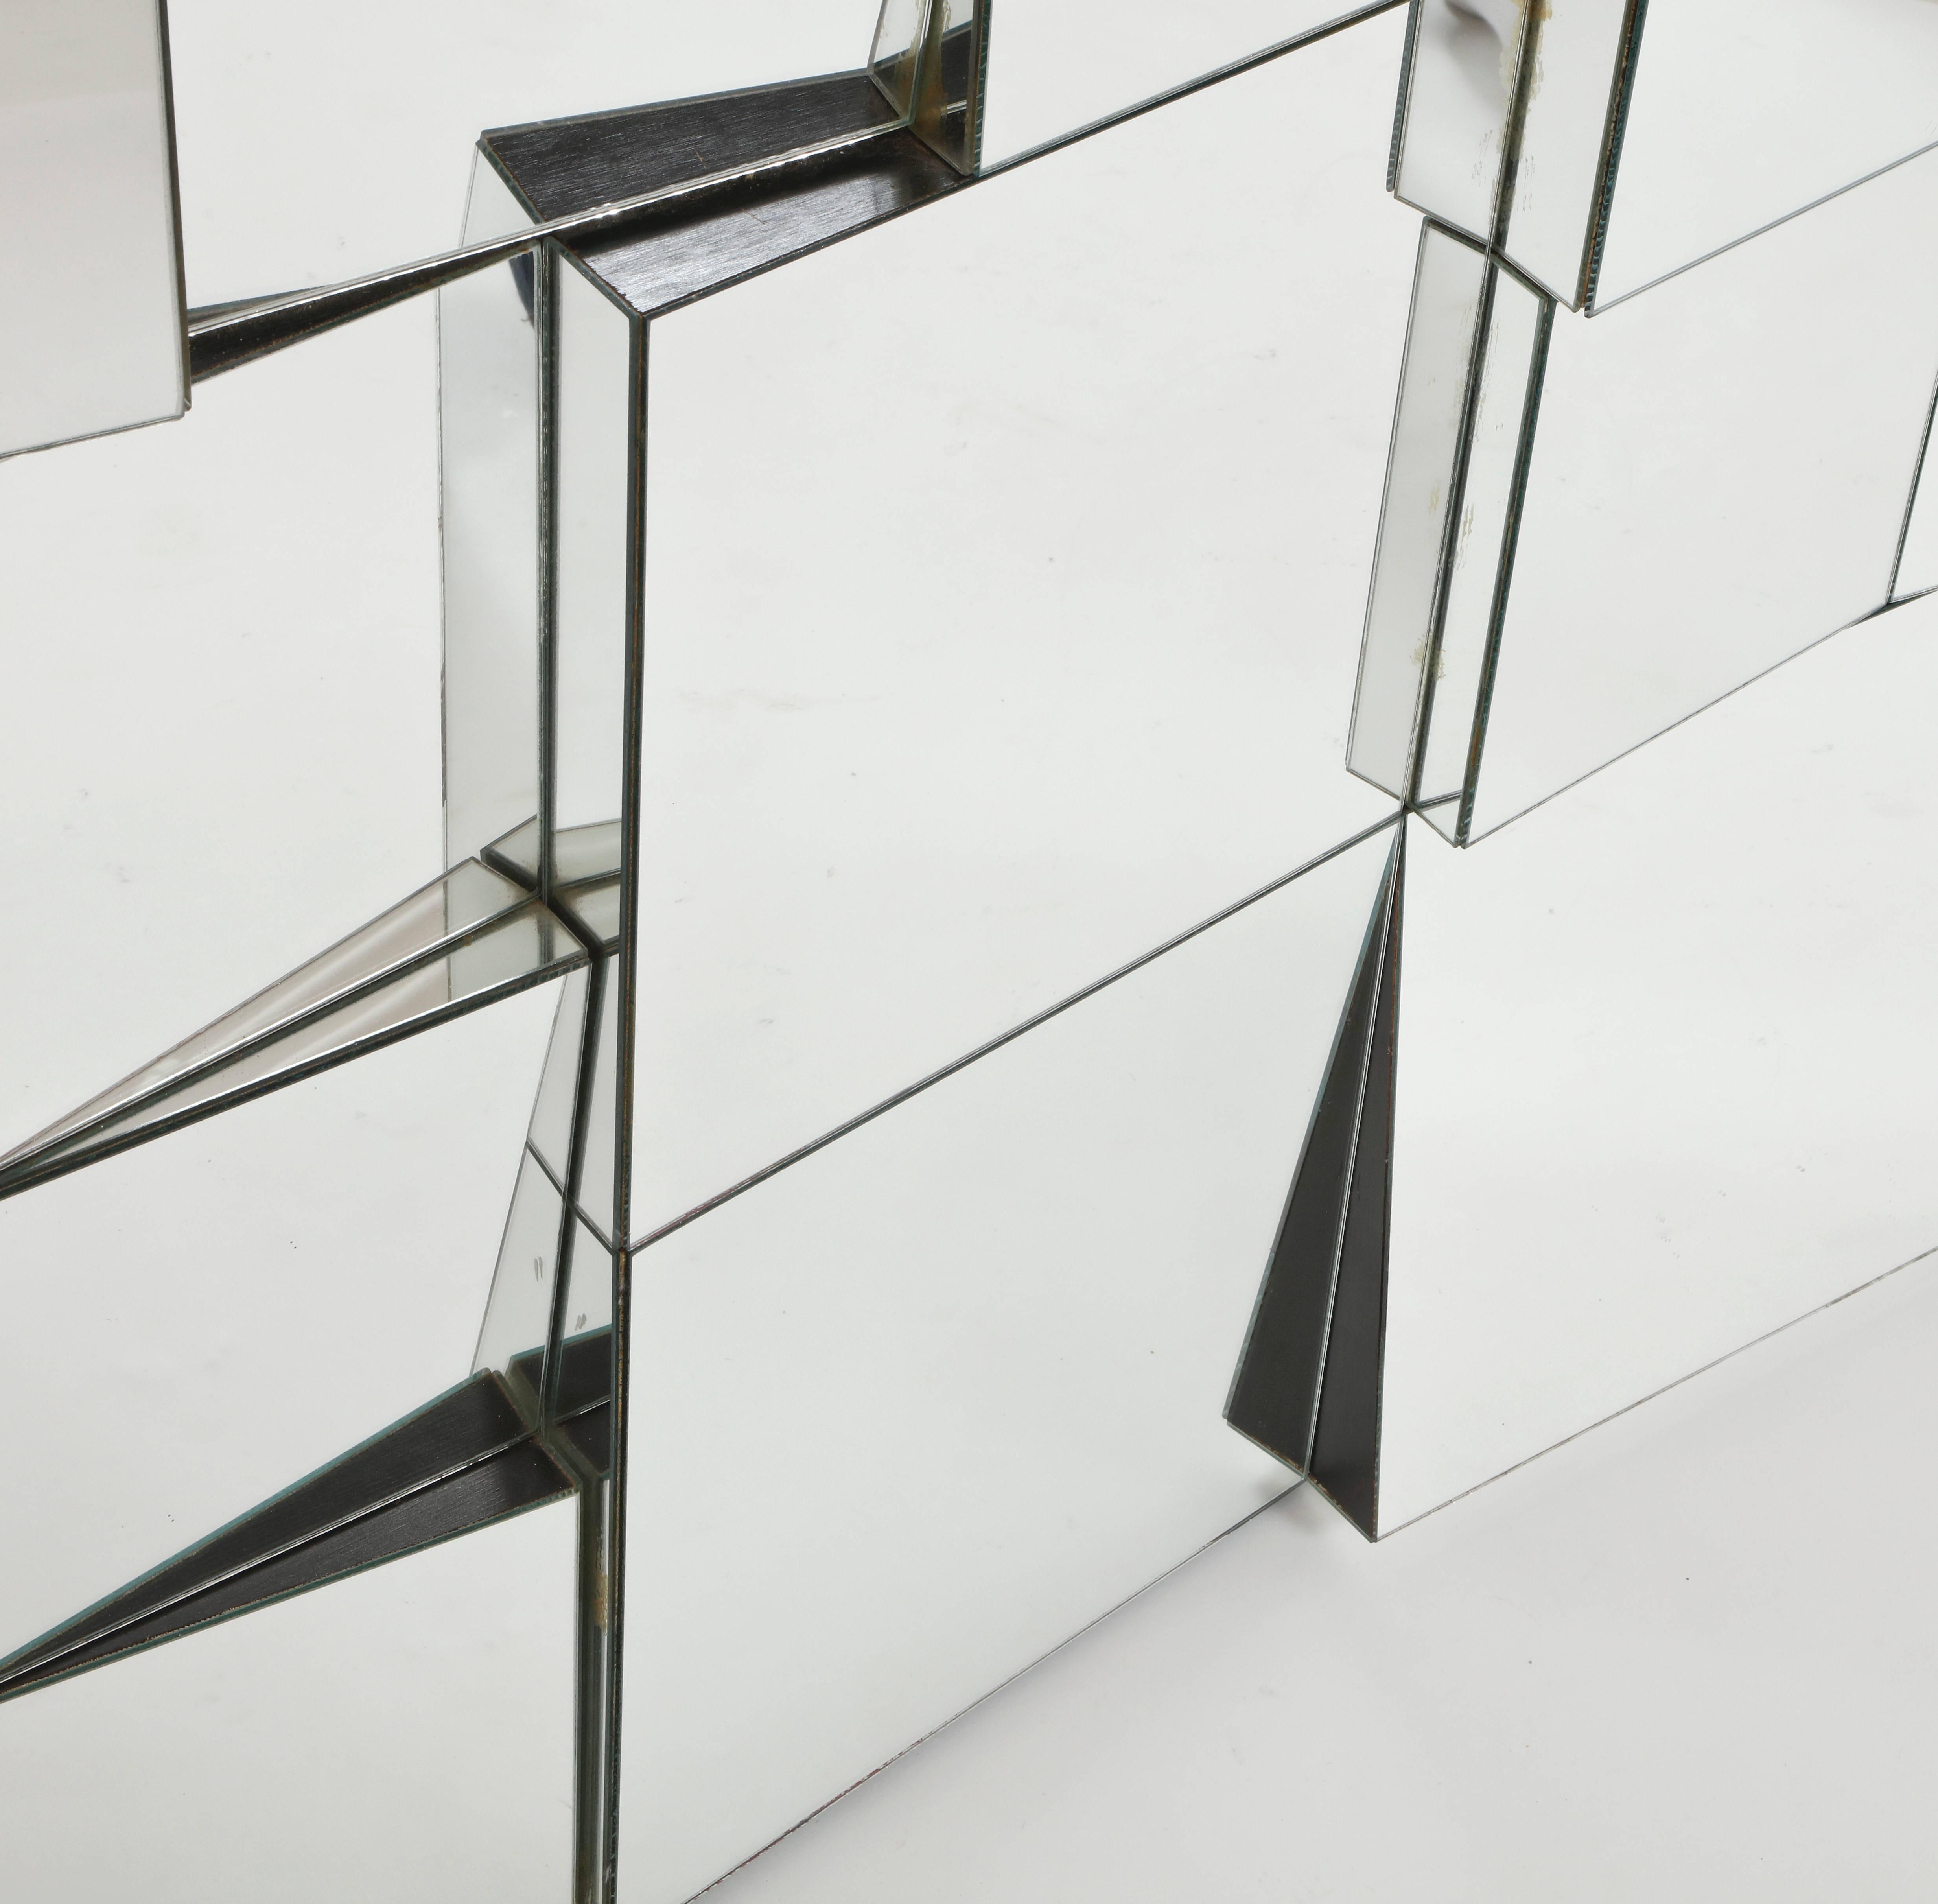 Neal small slopes mirror vintage wall mirror, 1970s.

Beautiful iconic 